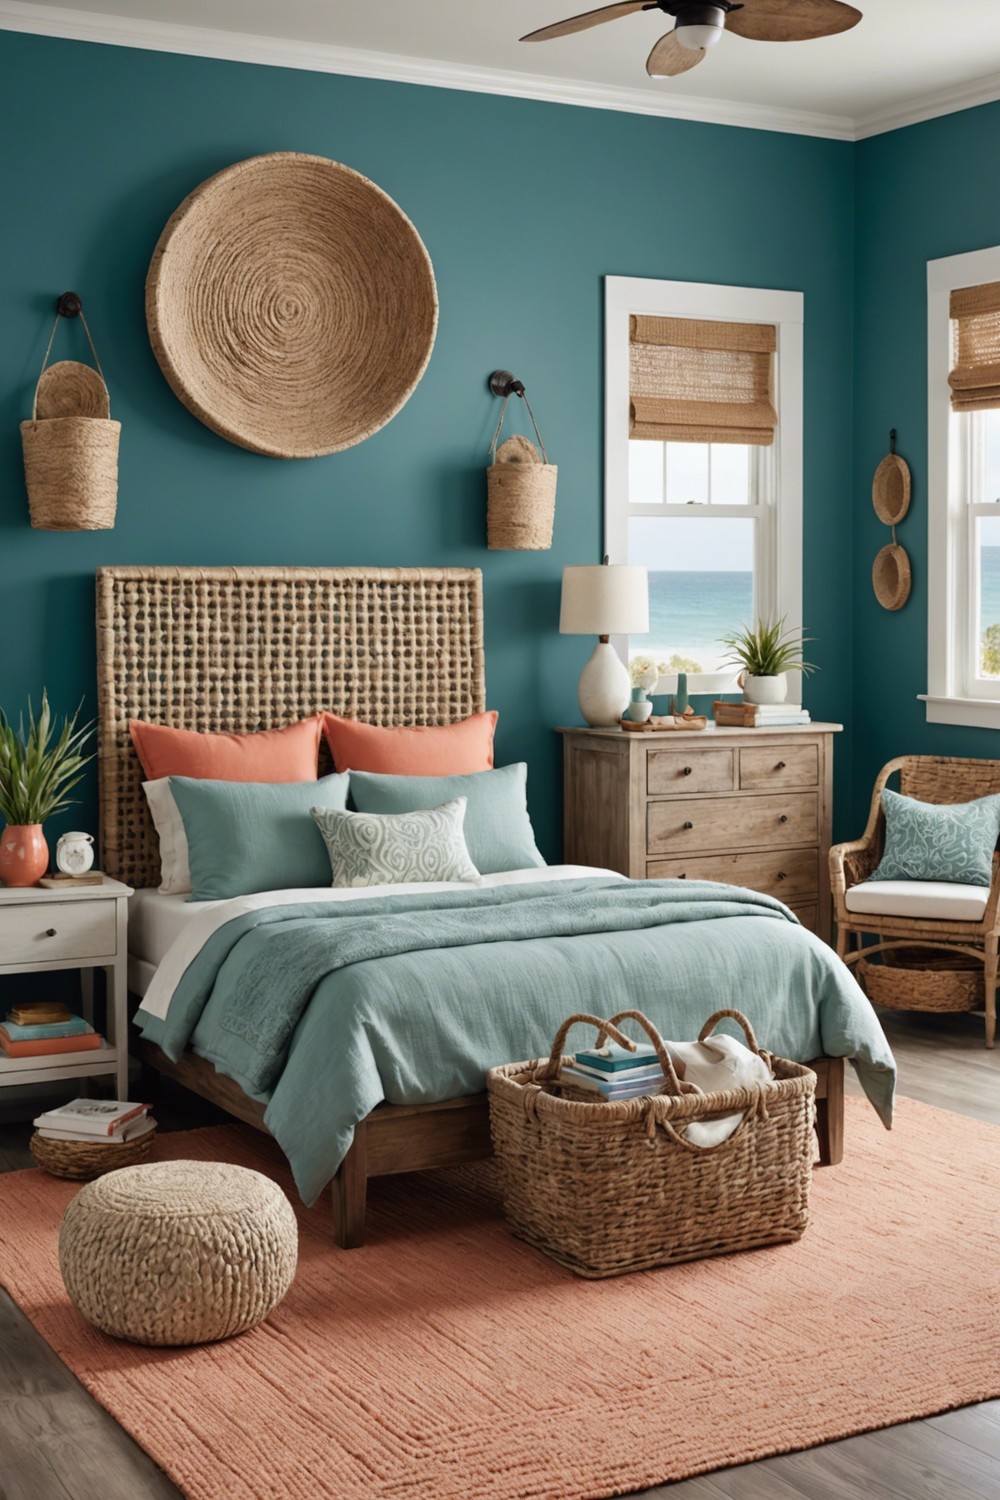 Coastal Chic: Teal and Coral Color Combo